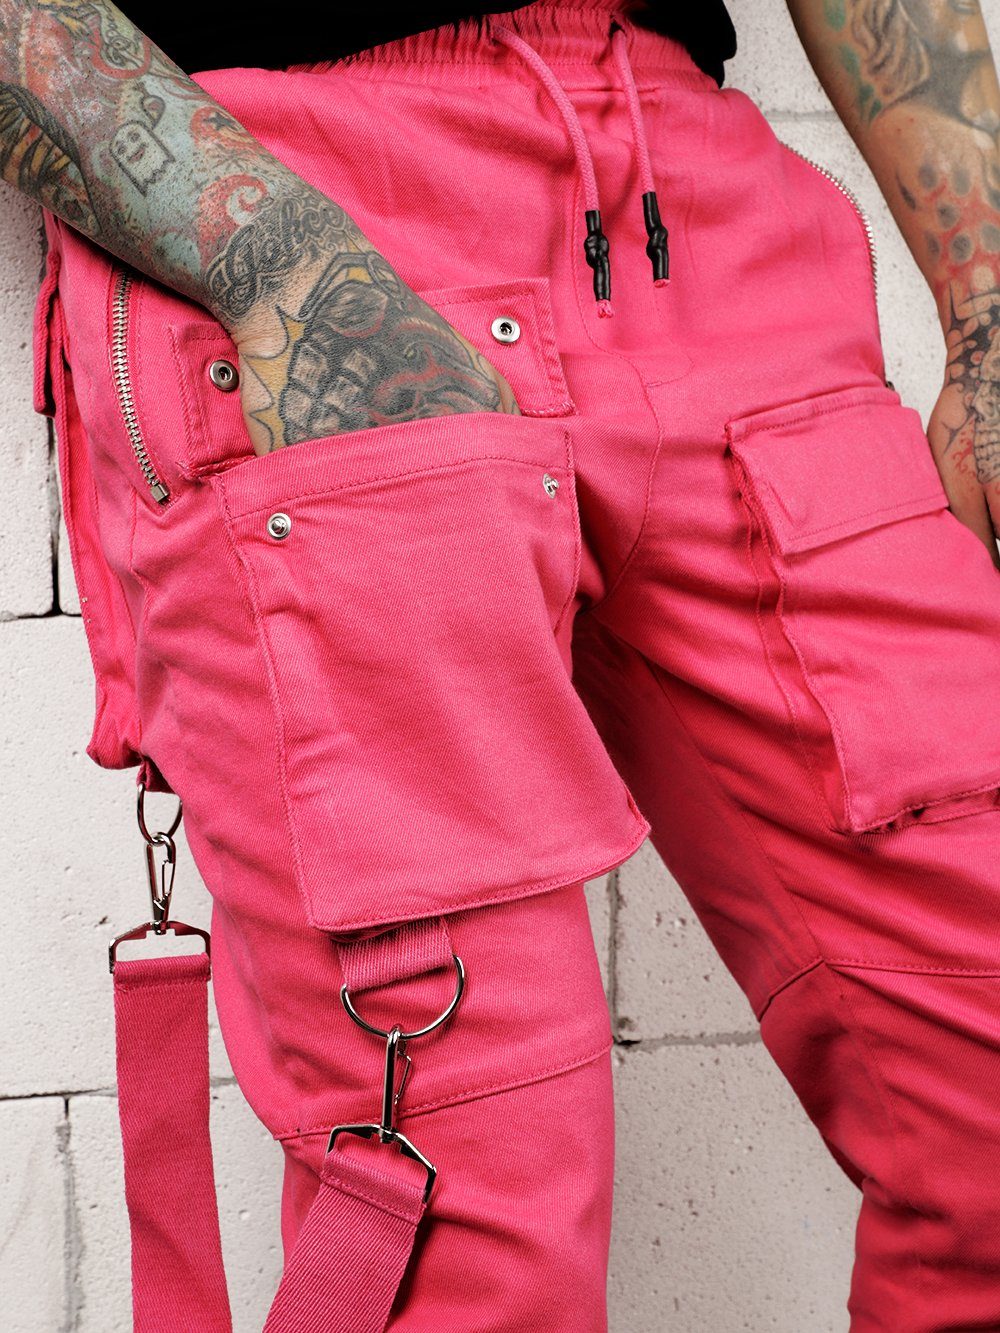 A man with tattoos wearing PINK BRONX cargo pants.